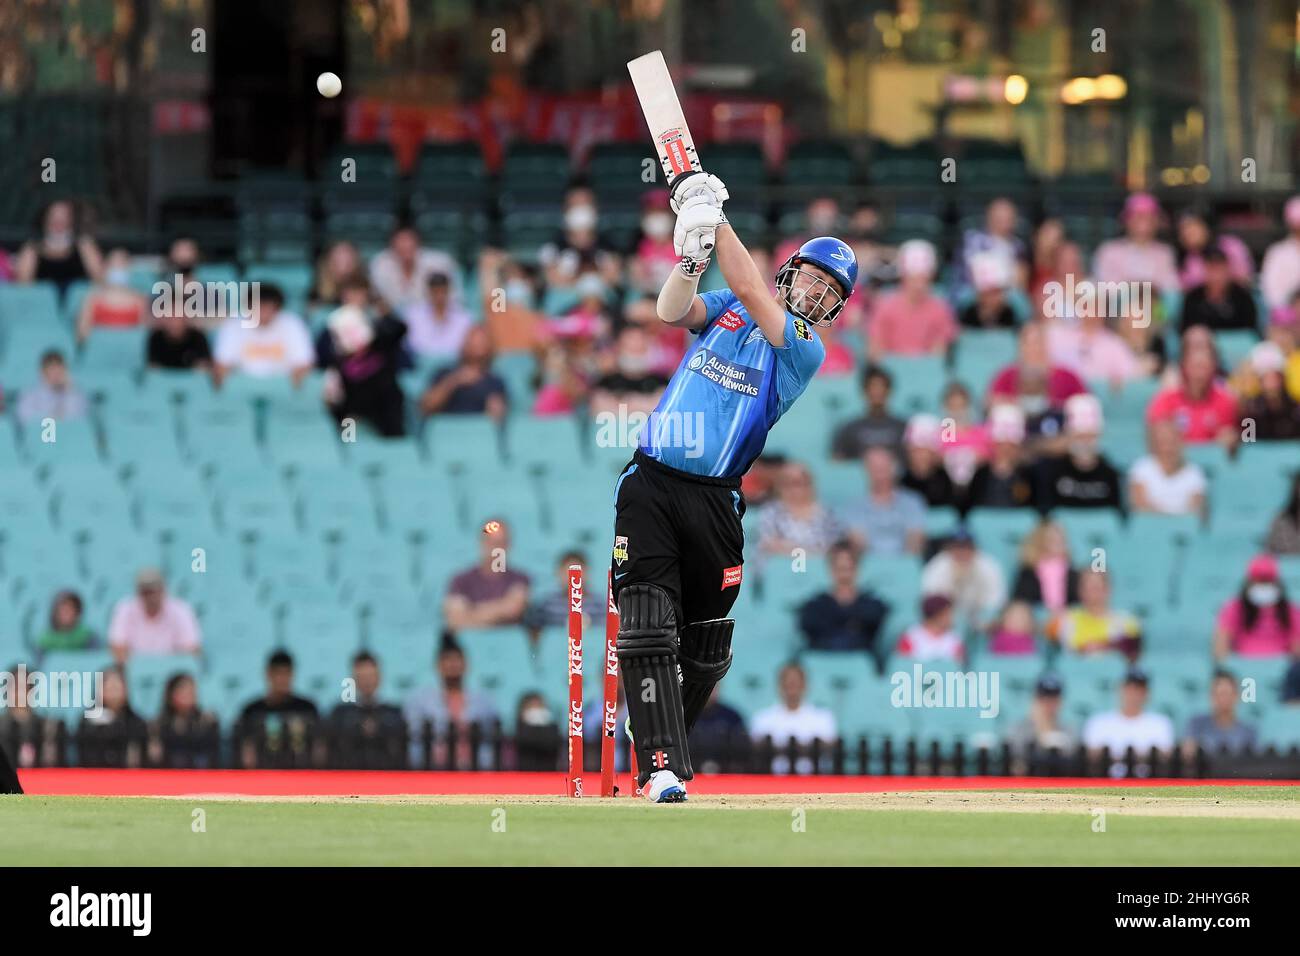 Sydney, Australia, 26 January, 2022. Travis Head of the Strikers gets bowled out during the Big Bash League Challenger cricket match between Sydney Sixers and Adelaide Strikers at The Sydney Cricket Ground on January 26, 2022 in Sydney, Australia. Credit: Steven Markham/Speed Media/Alamy Live News Stock Photo